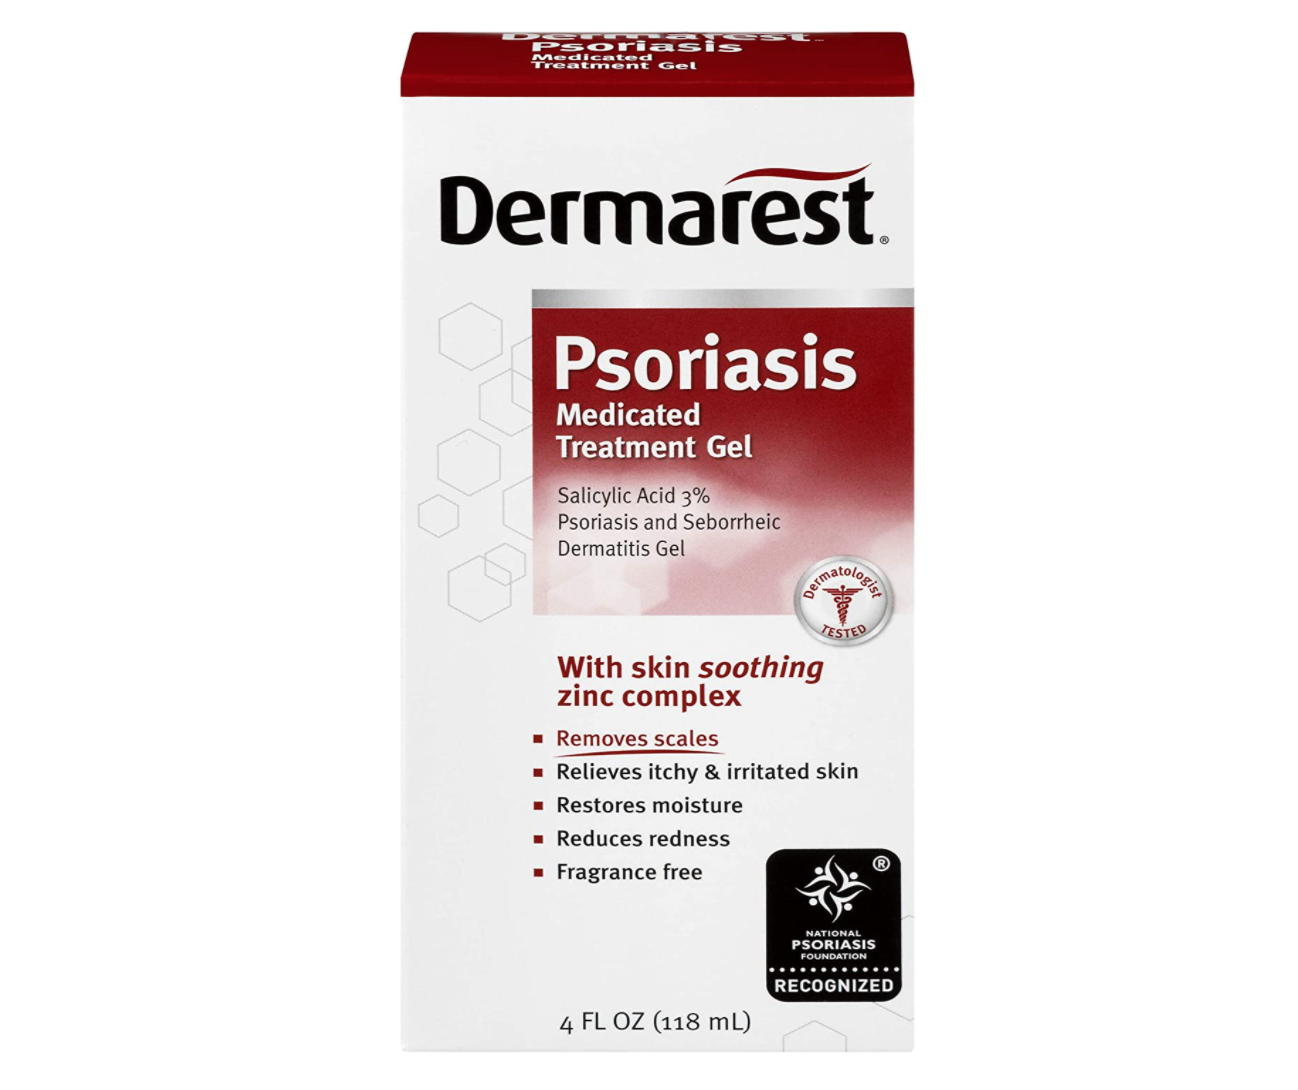 Best ointment for psoriasis uk